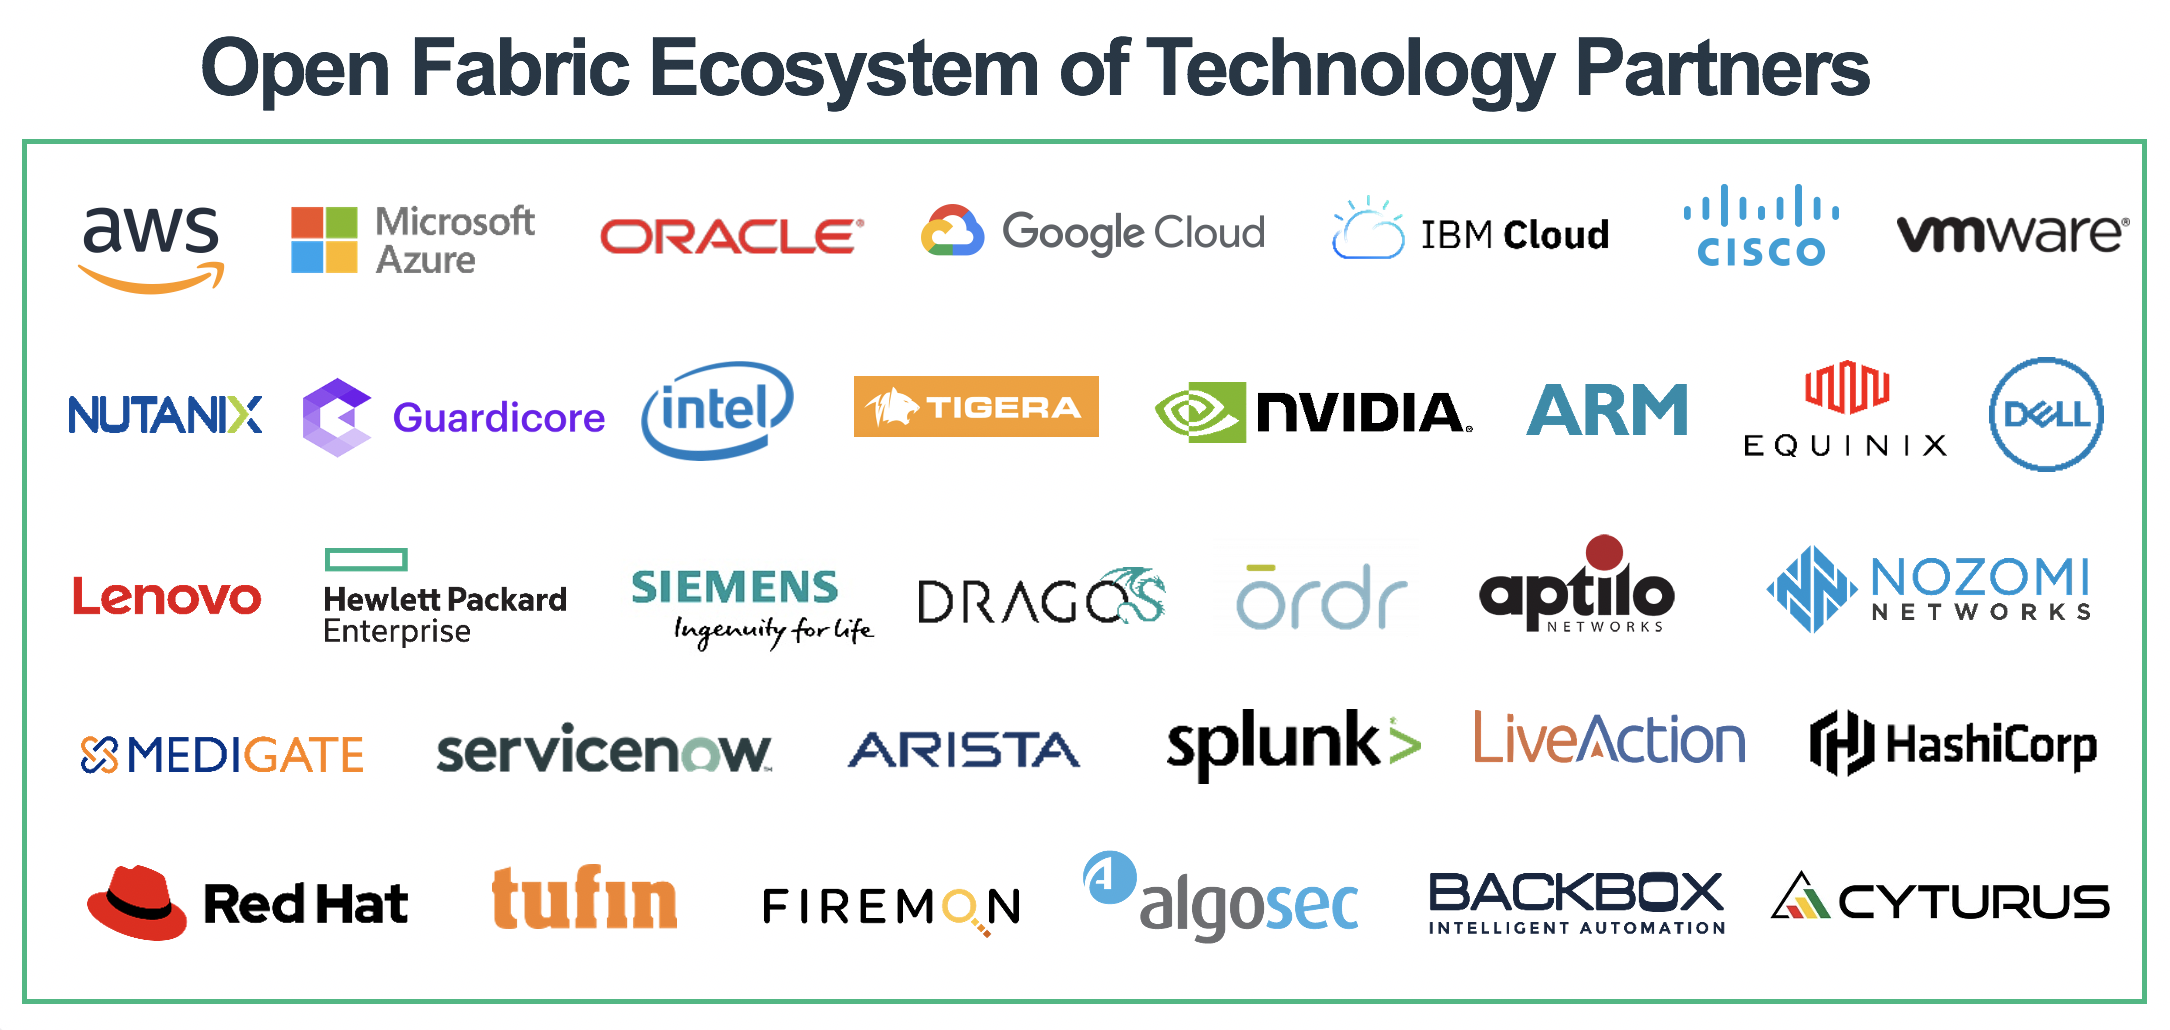 Open Fabric Ecosystem of Technology Partners